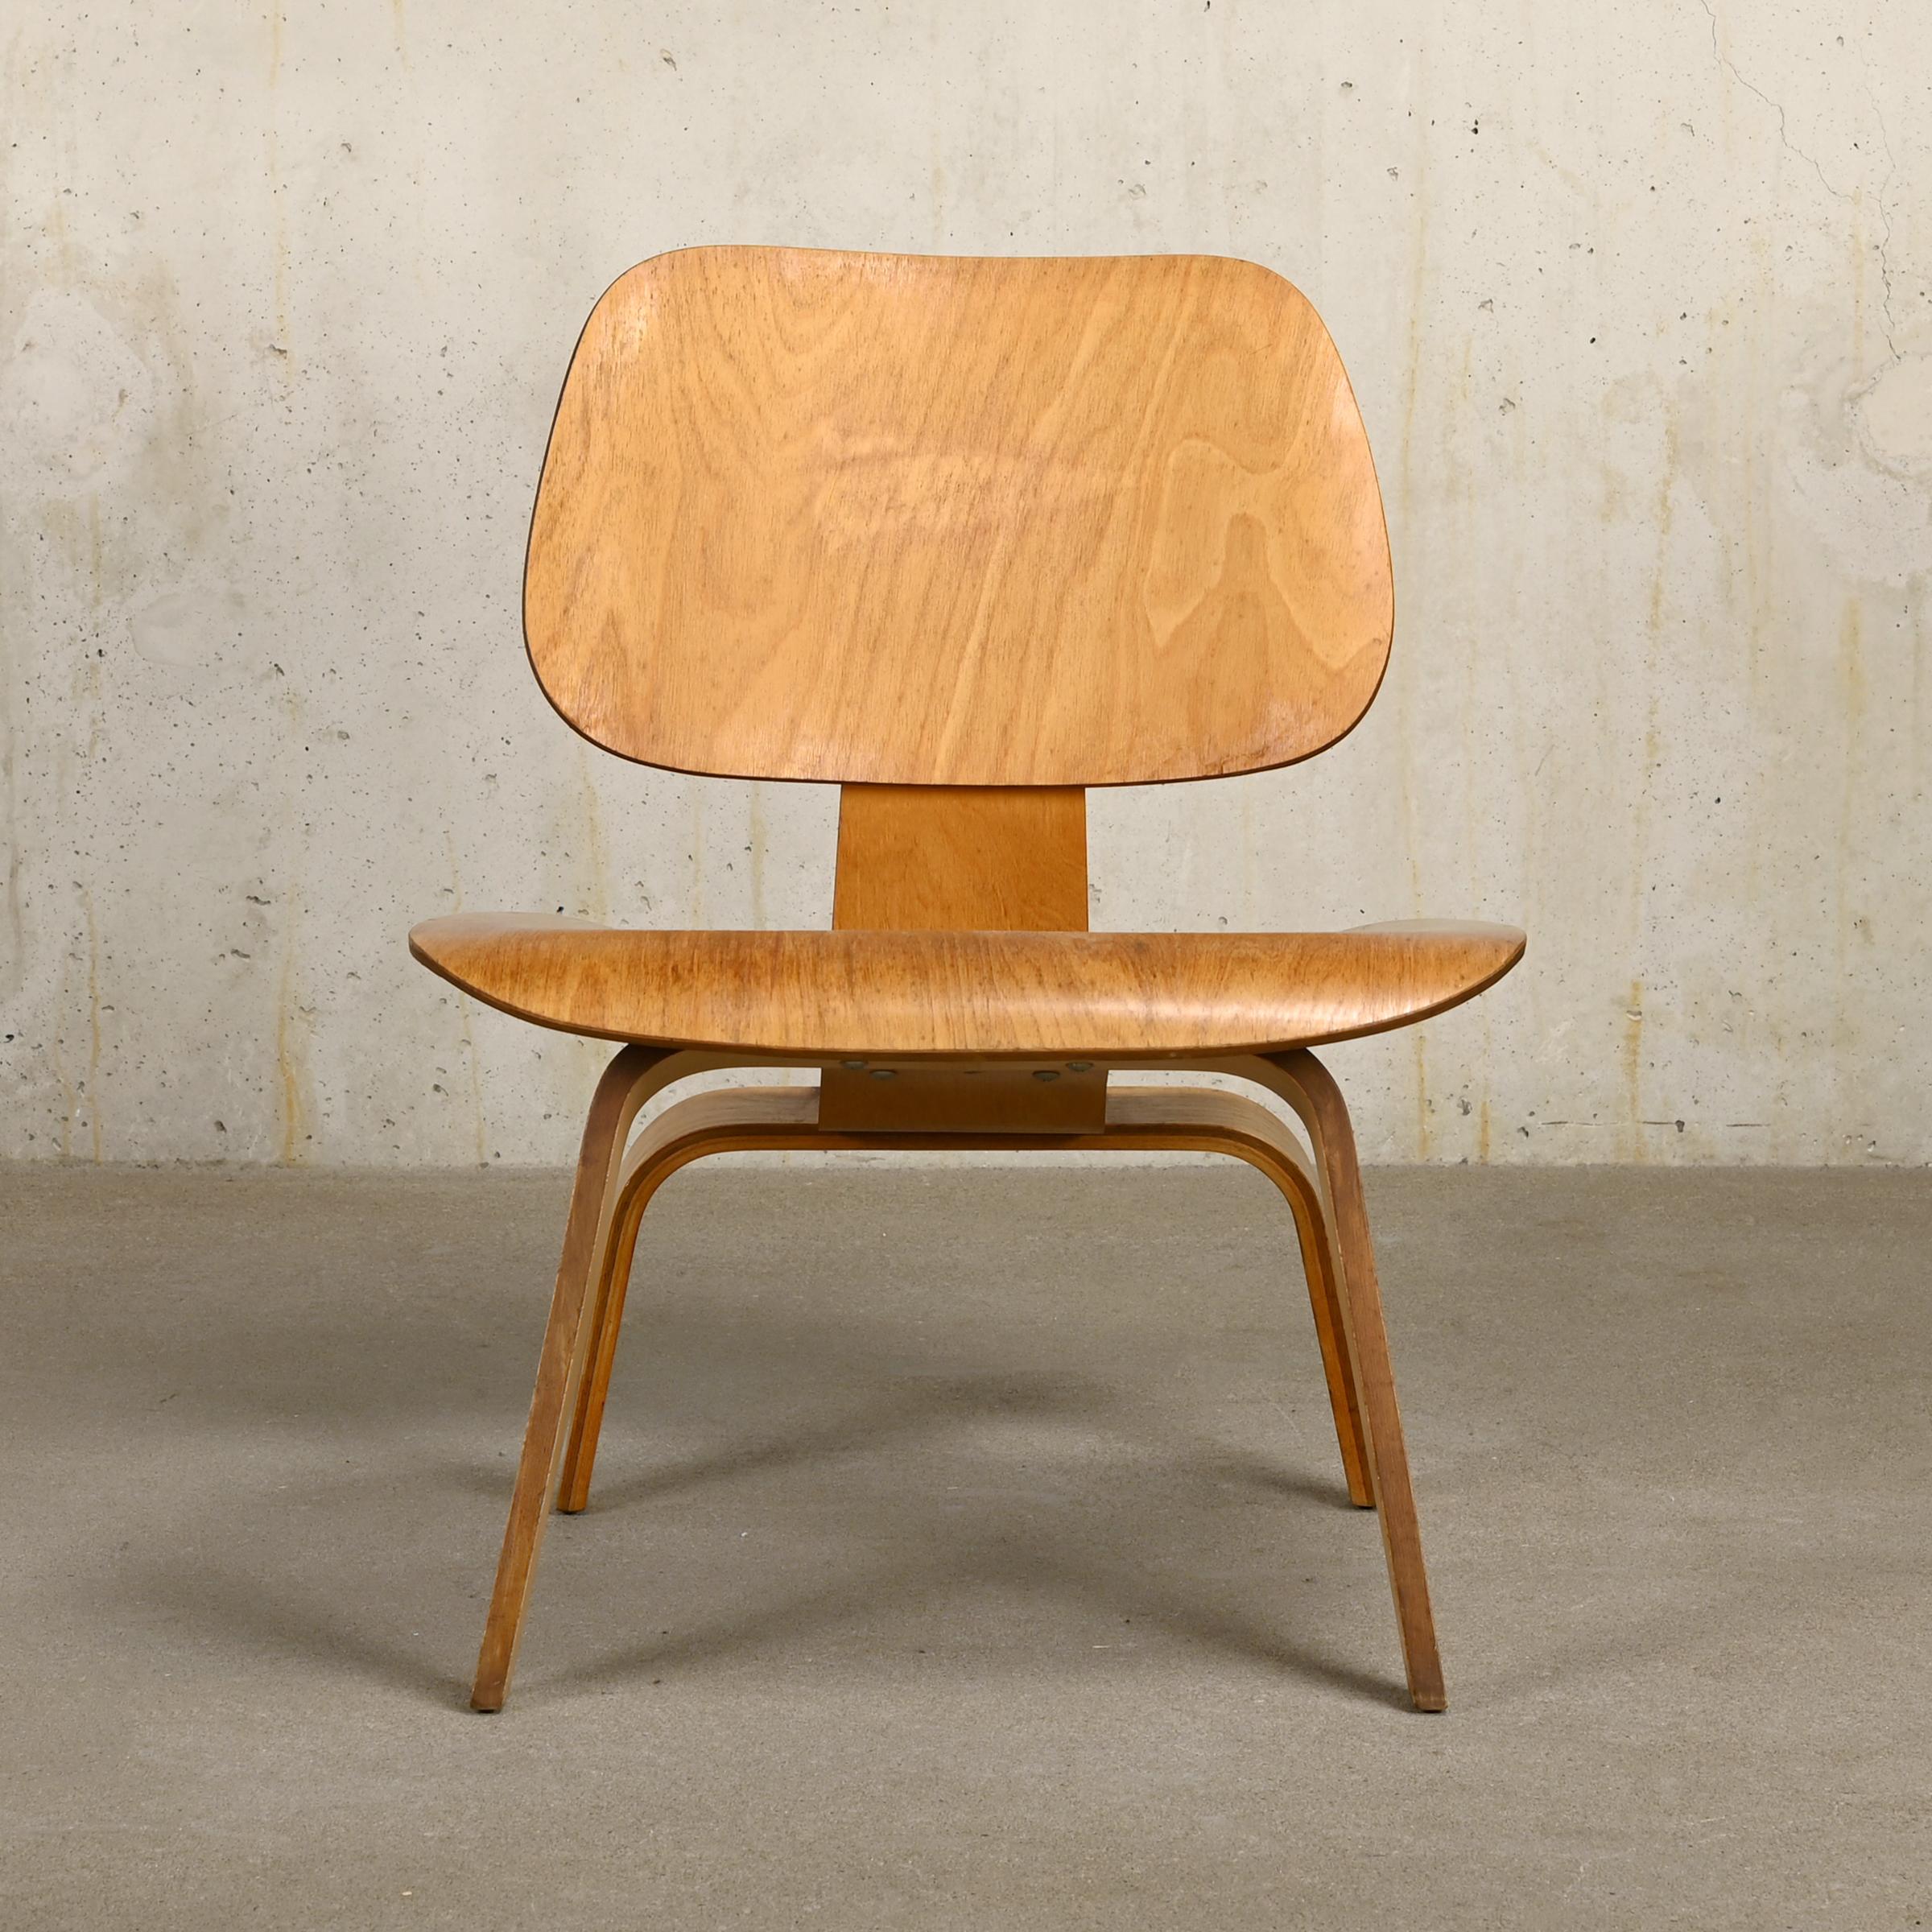 Mid-20th Century Charles & Ray Eames vintage LCW Lounge Chair in Ash Plywood for Herman Miller